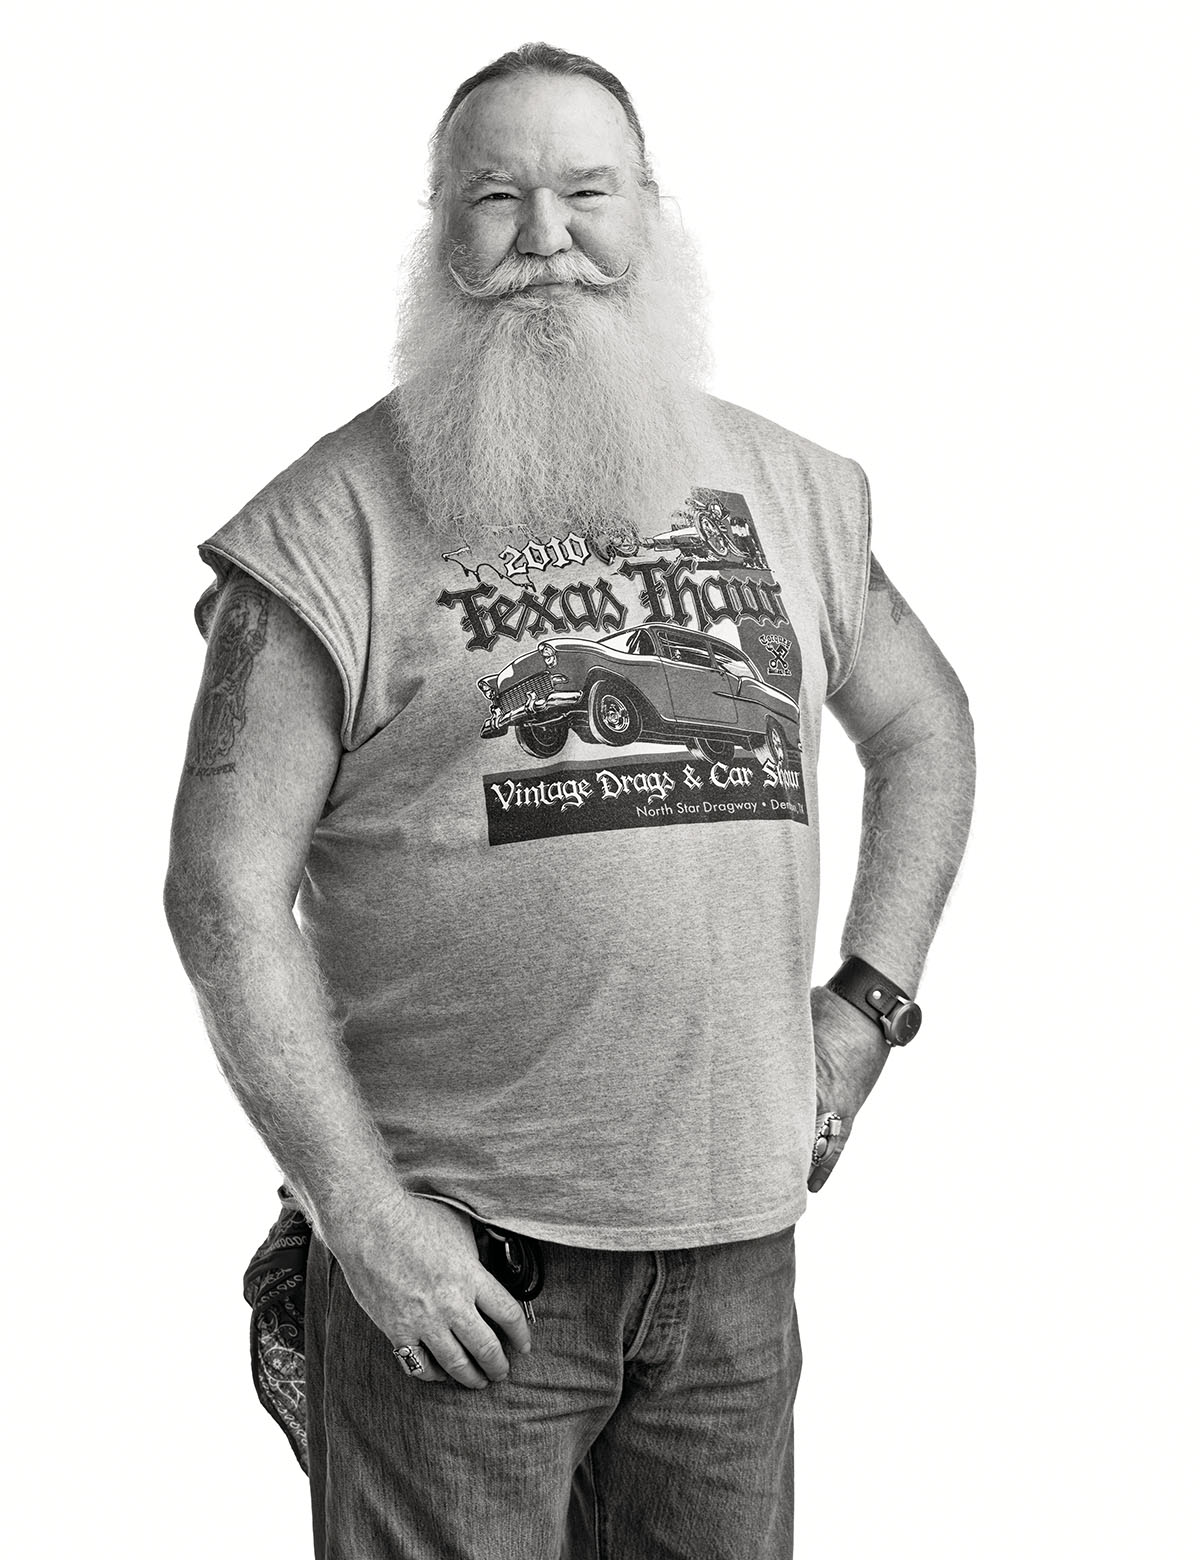 A man with a large white beard in a cut-off t-shirt stands with his hands in his pockets